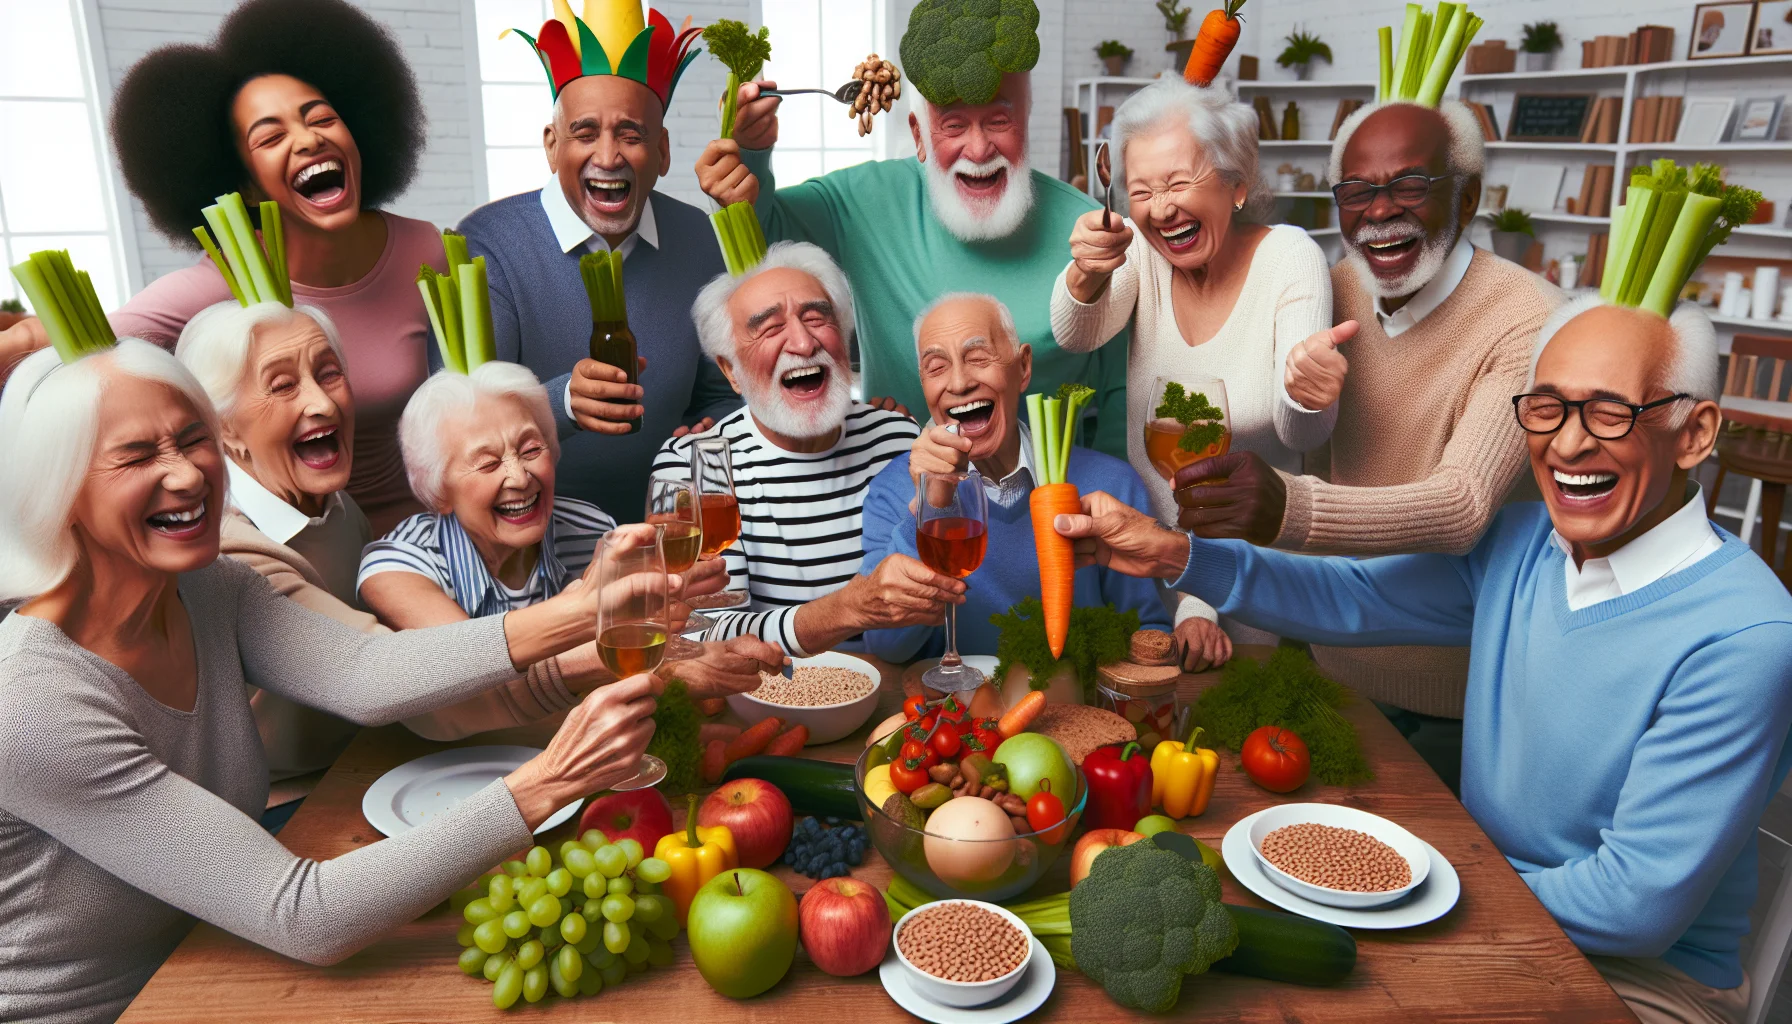 Generate a humorous and realistic image of various high fiber foods, which are significantly beneficial for individuals living with diabetes. These foods could be fruits, whole grains, or legumes. Set the scene in a lively senior citizen club where a diverse group of jovial elderly people are laughing, conversing, and partaking in a shared healthy meal. These individuals include Black, Hispanic, Caucasian, and Asian men and women. Have them holding oversized forks and spoons, playfully toasting with celeries or carrot sticks, and appreciating the healthy dietary choices they've made. Feel free to include humorous elements such as exaggerated smiles, laugh lines, and food-themed hats.